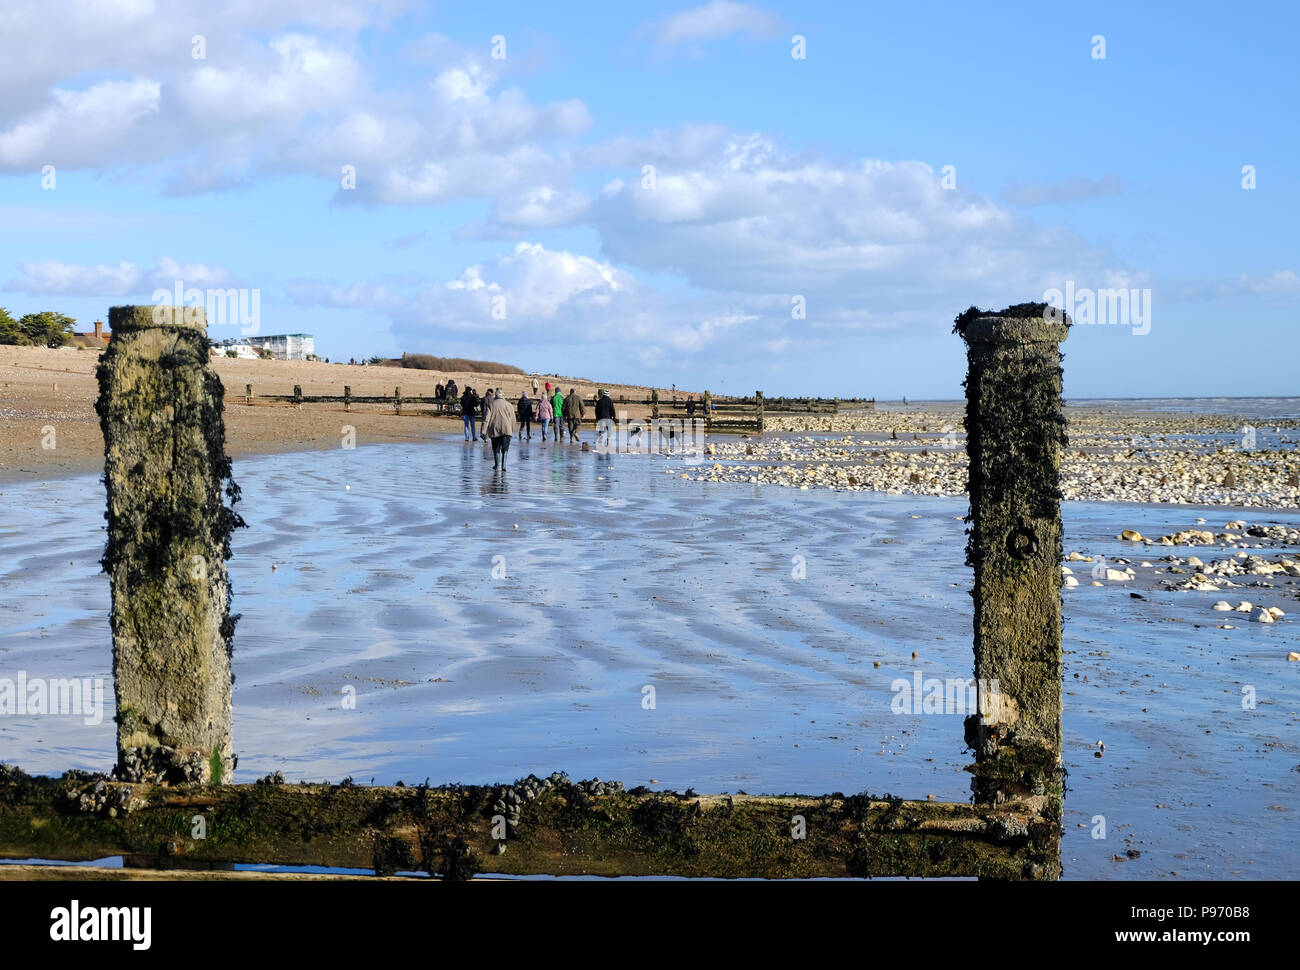 East Preston, UK. Group of people walking along the beach at low tide on a winter's afternoon. Stock Photo